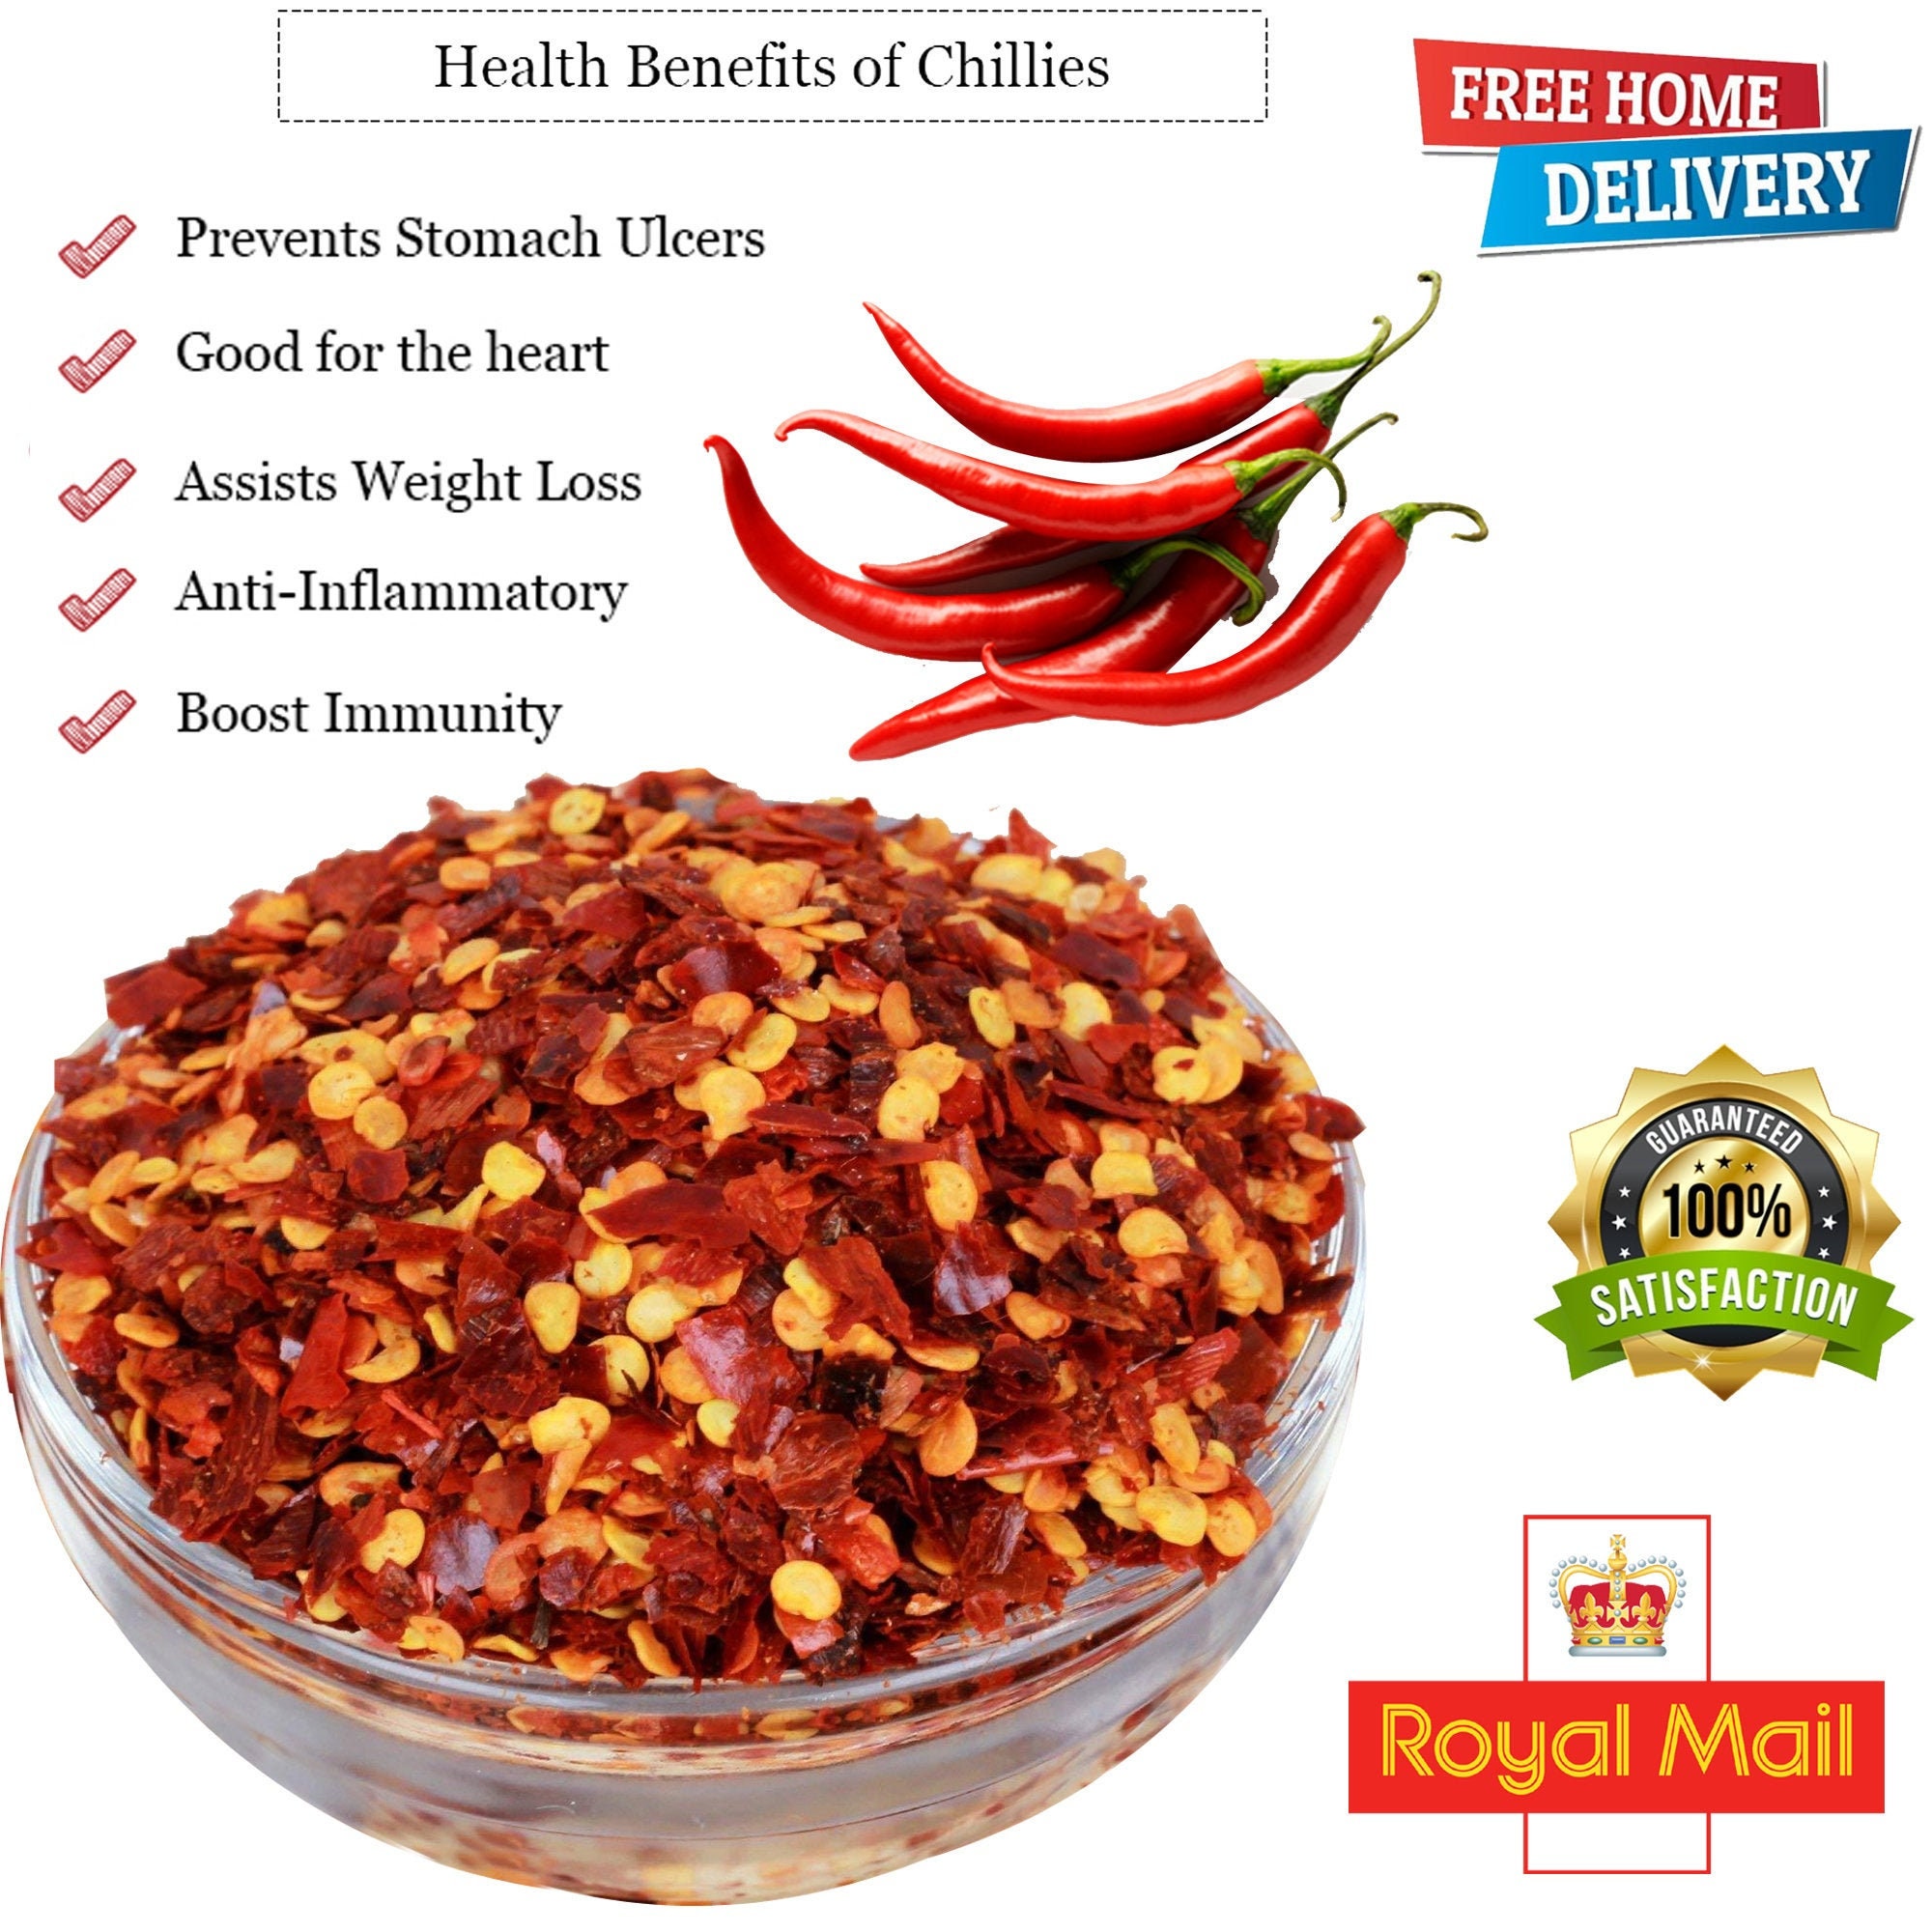 Save on Nature's Promise Organic Chili Seasoning Packet Order Online  Delivery